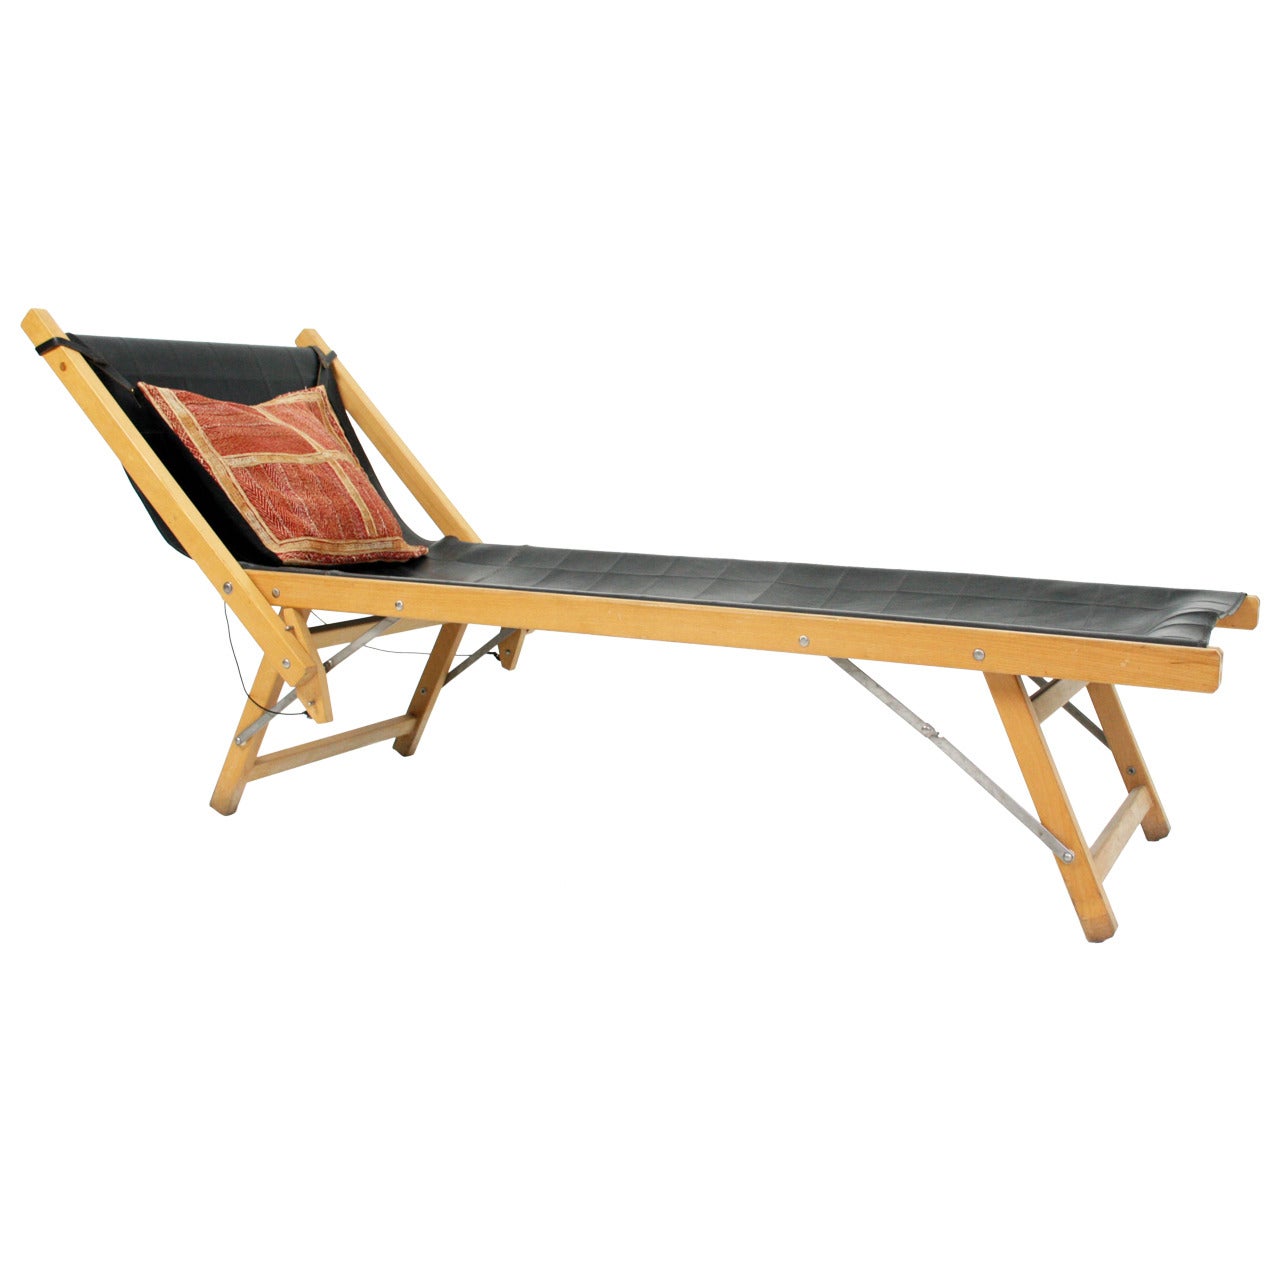 Rare Limited Edition Henry Beguelin Leather Safari Adjustable Chaise Lounge For Sale